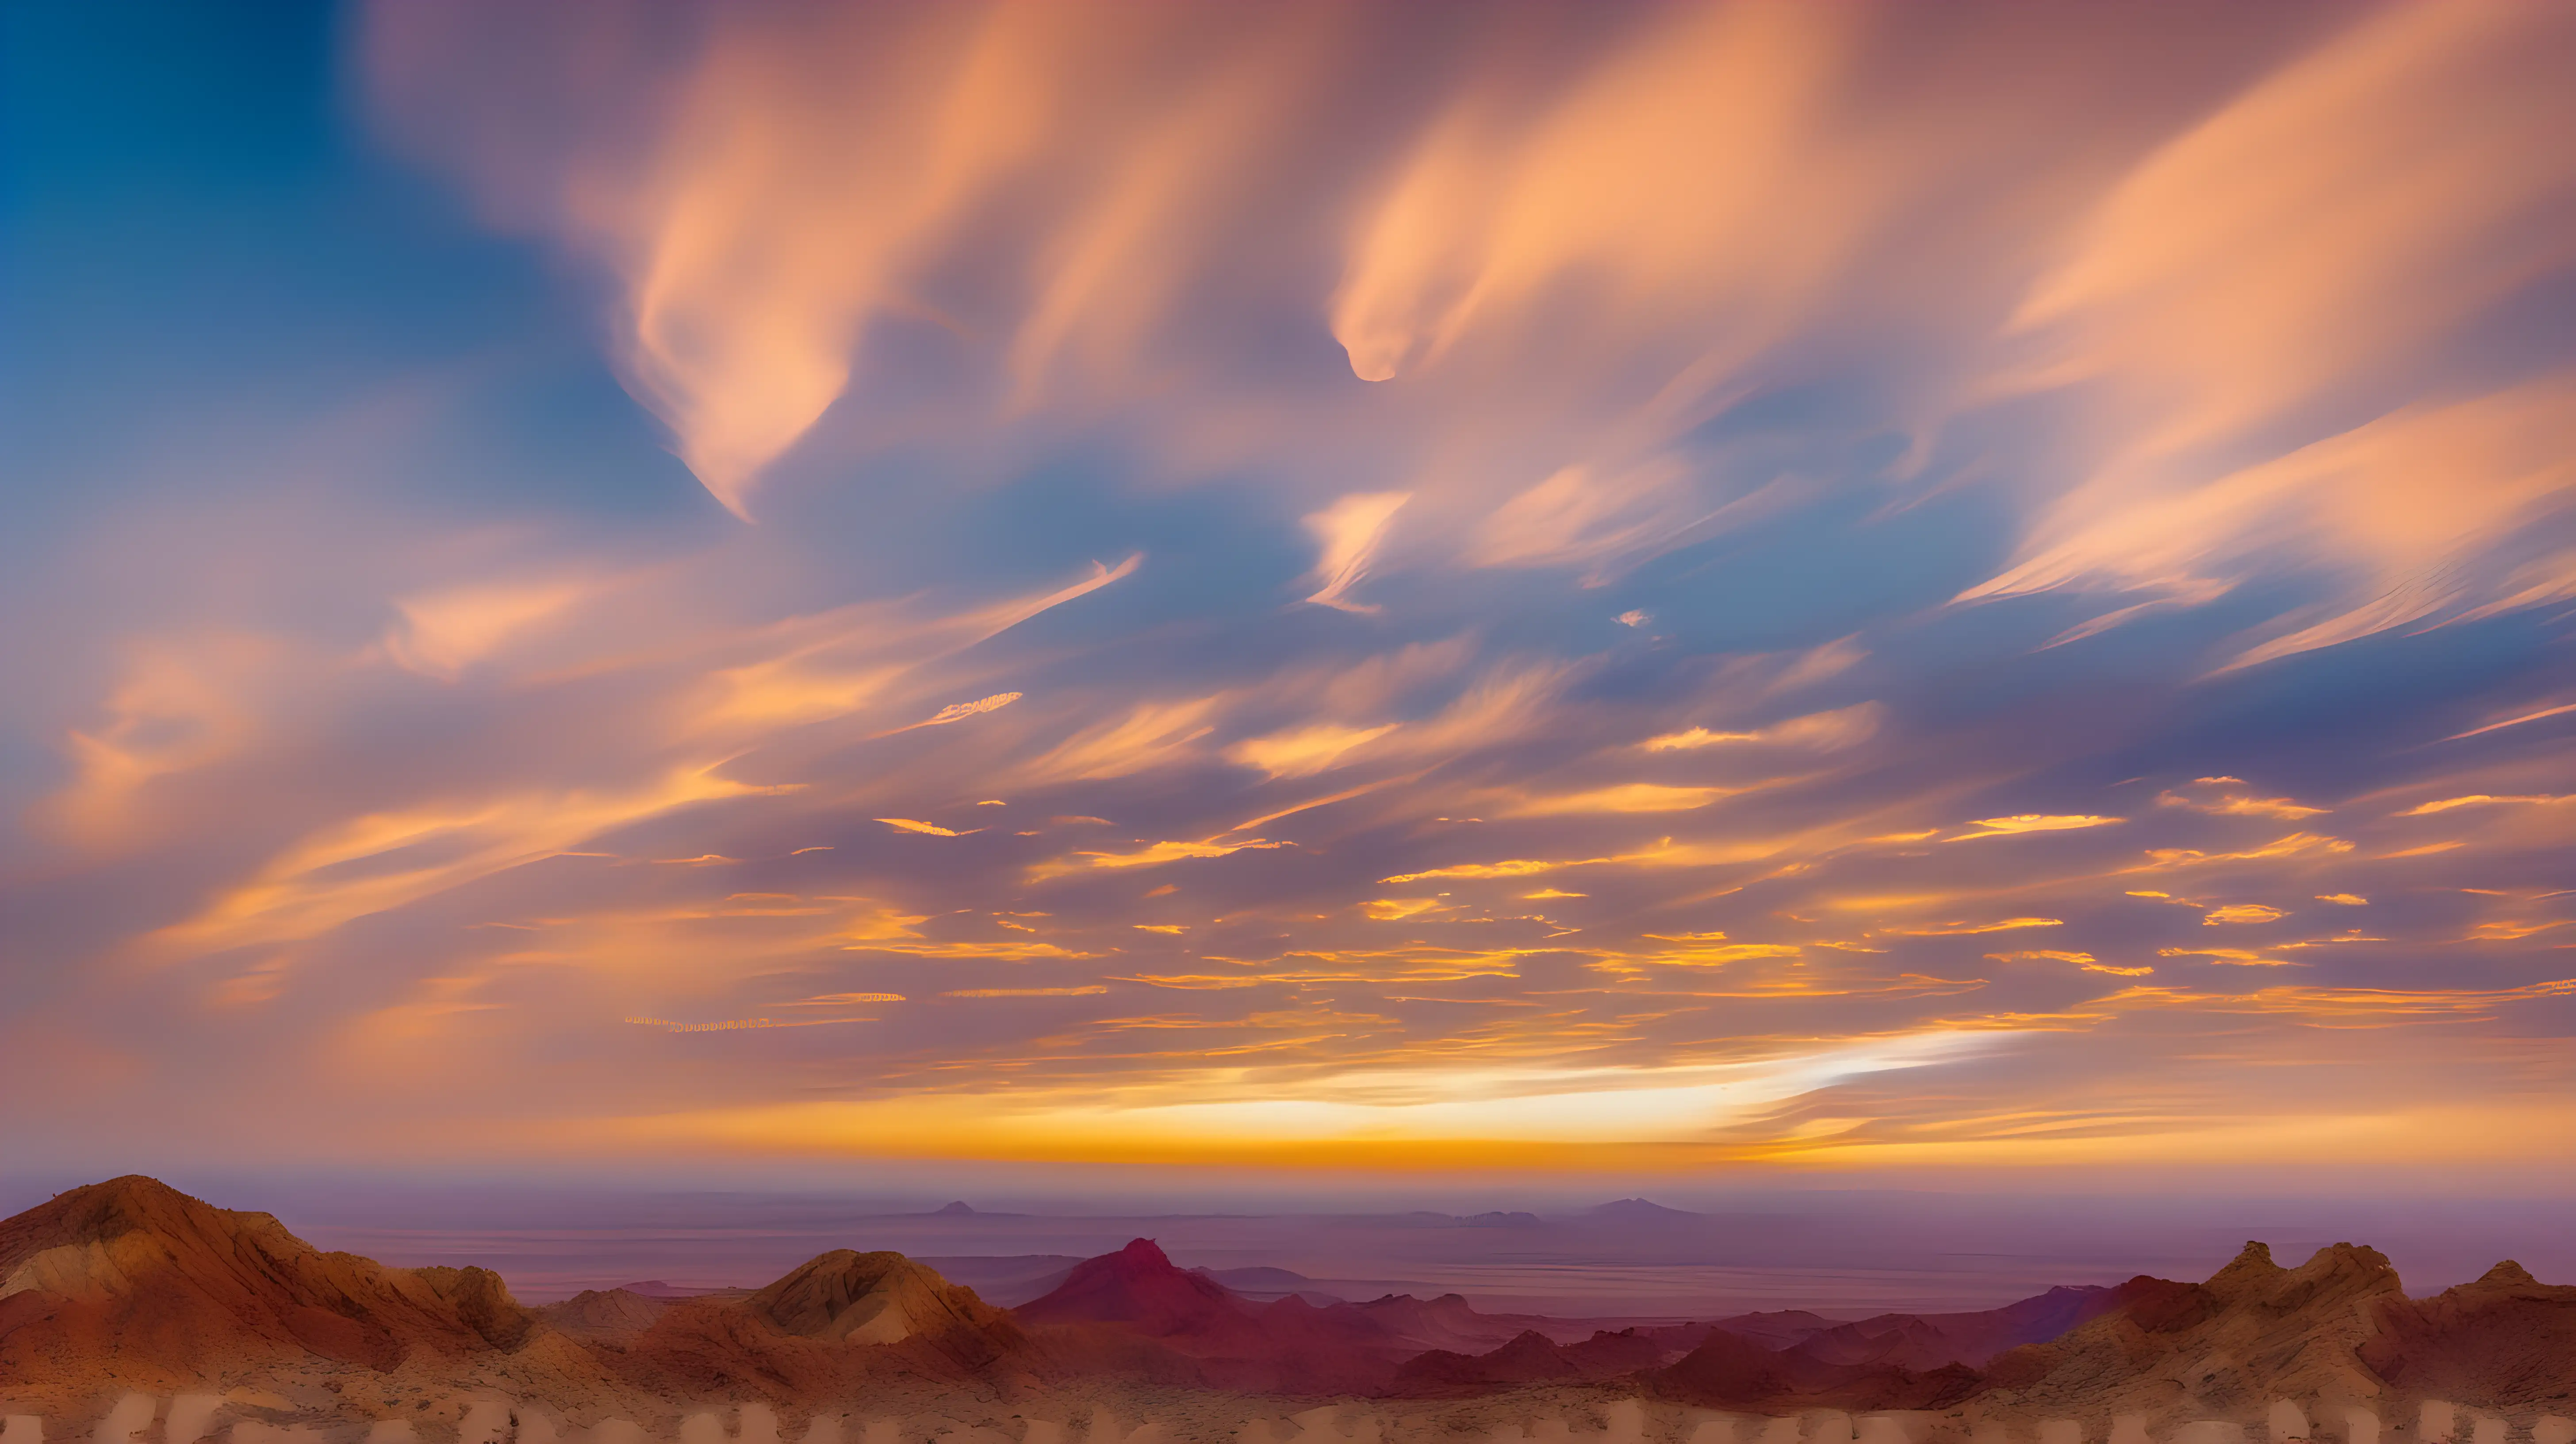 Layers of pastel clouds blending with the golden light, creating a kaleidoscope of colors over the desert horizon